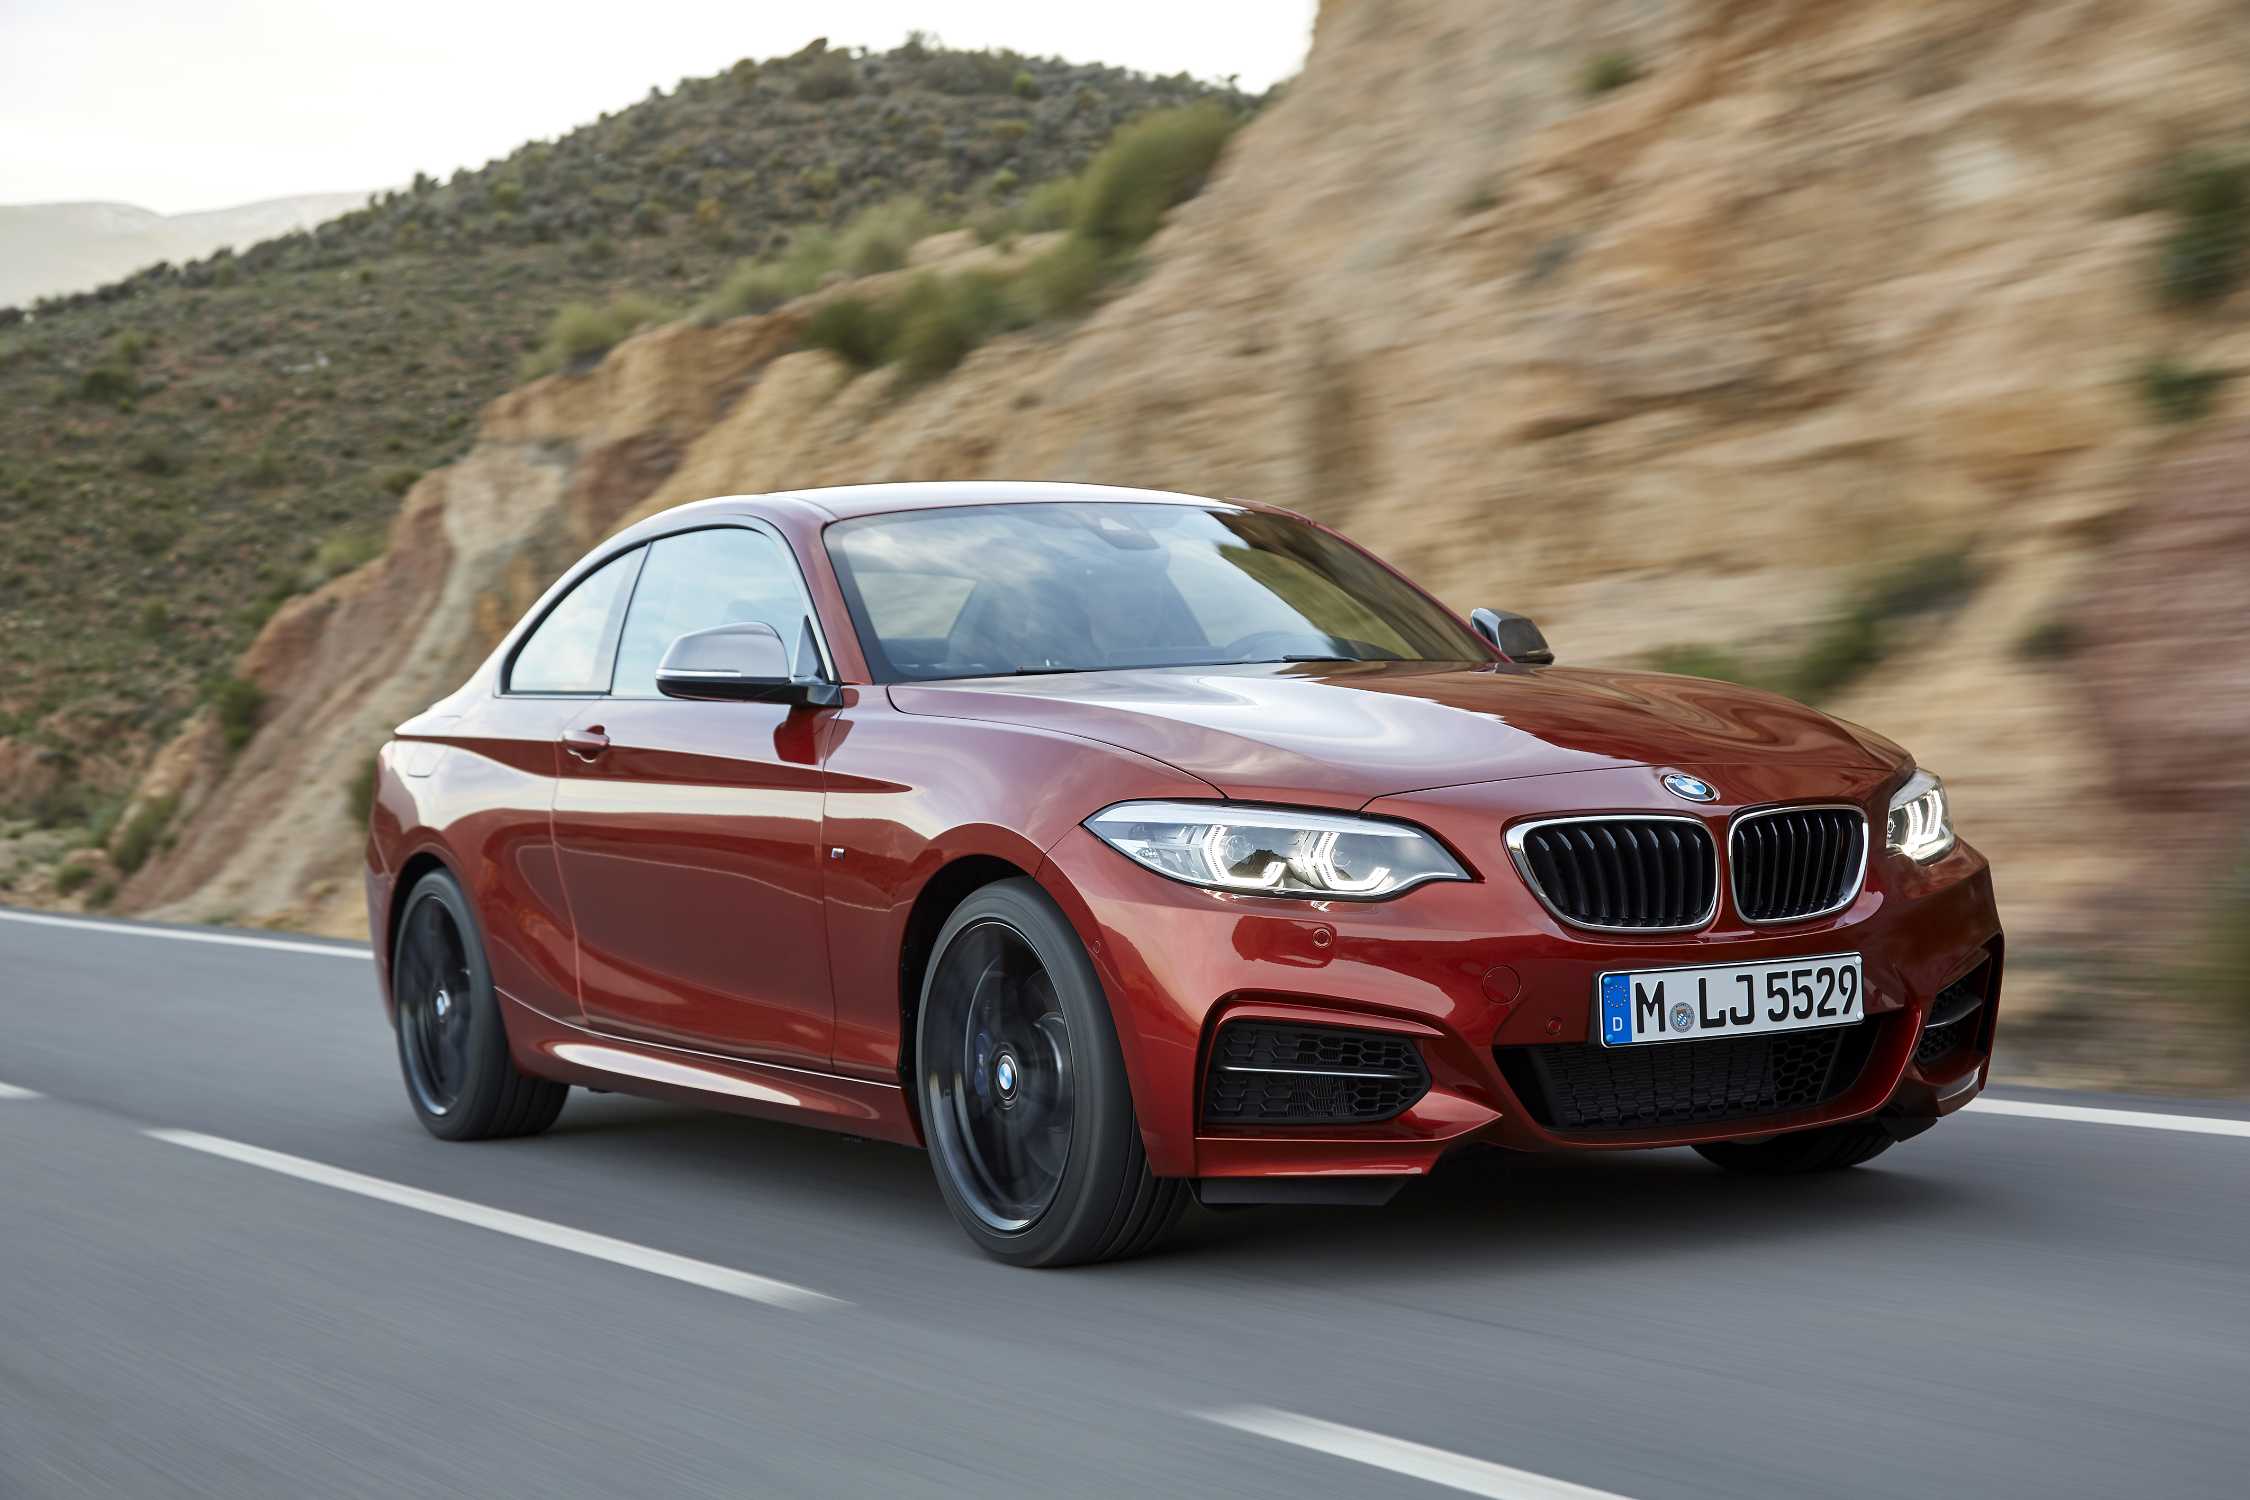 The new BMW 2 Series Coupe (05/2017).